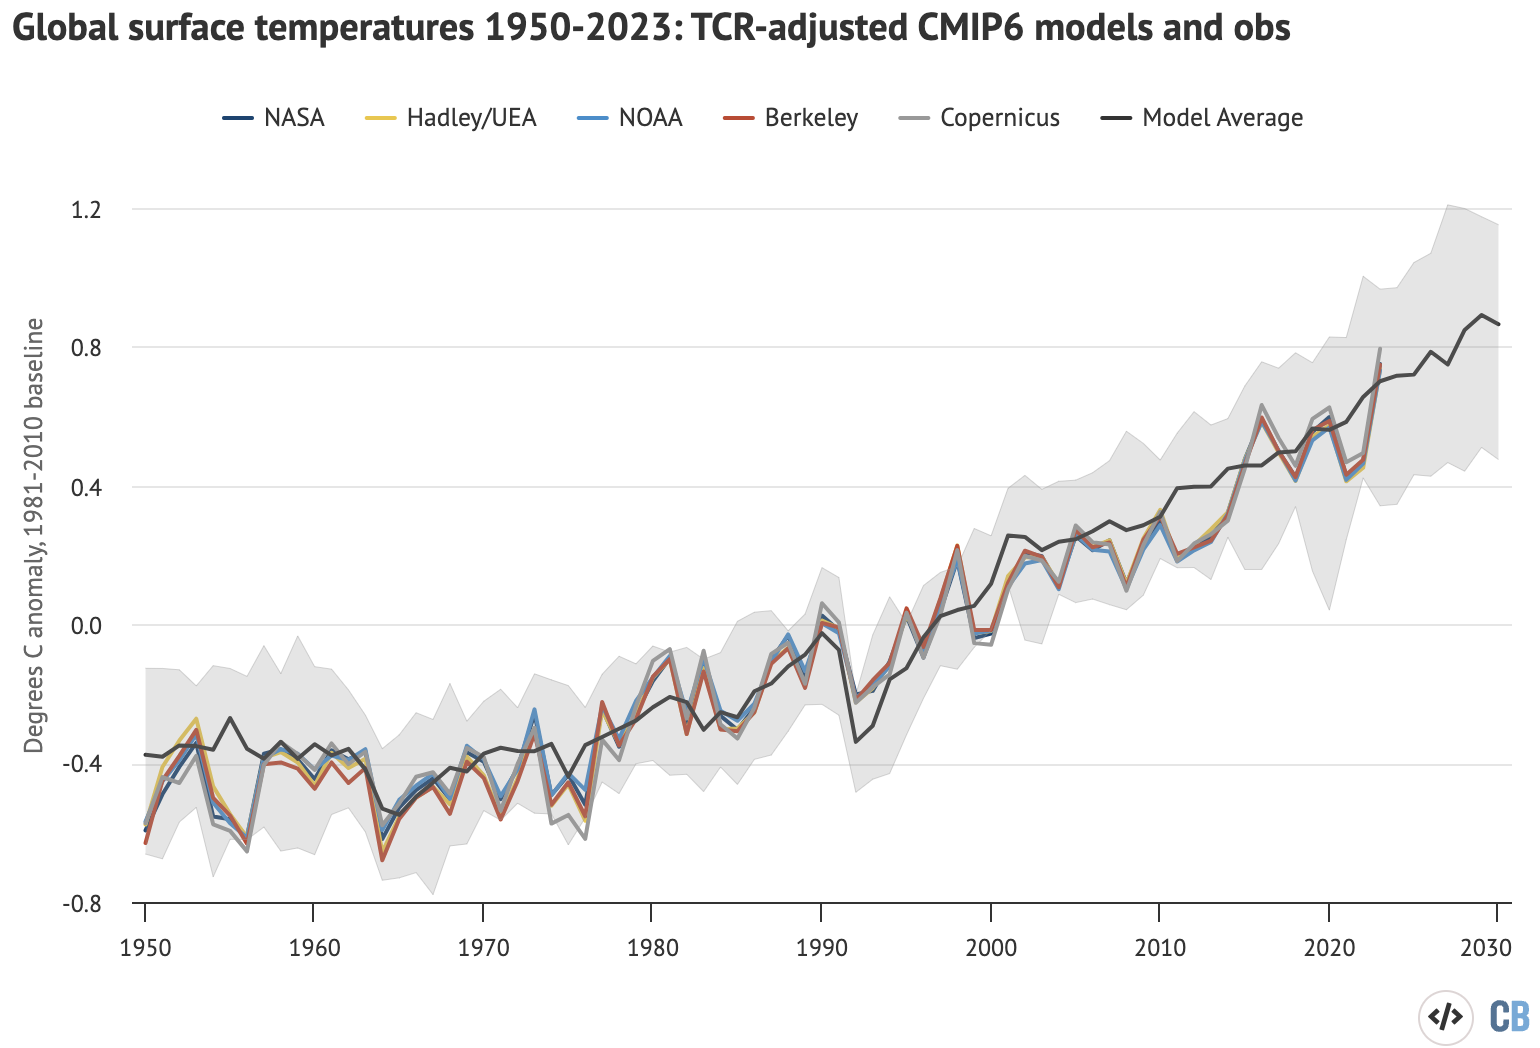 Annual global average surface temperatures from CMIP6 models and observations between 1950 and 2030 (through to 2023 for observations). Models use the SSP2-4.5 scenario after 2015. They are screened to only include those models with a transient climate response (TCR) in-line with the IPCC’s “likely” range as discussed in Hausfather et al (2022). Anomalies plotted with respect to a 1981-2010 baseline. Chart by Carbon Brief.